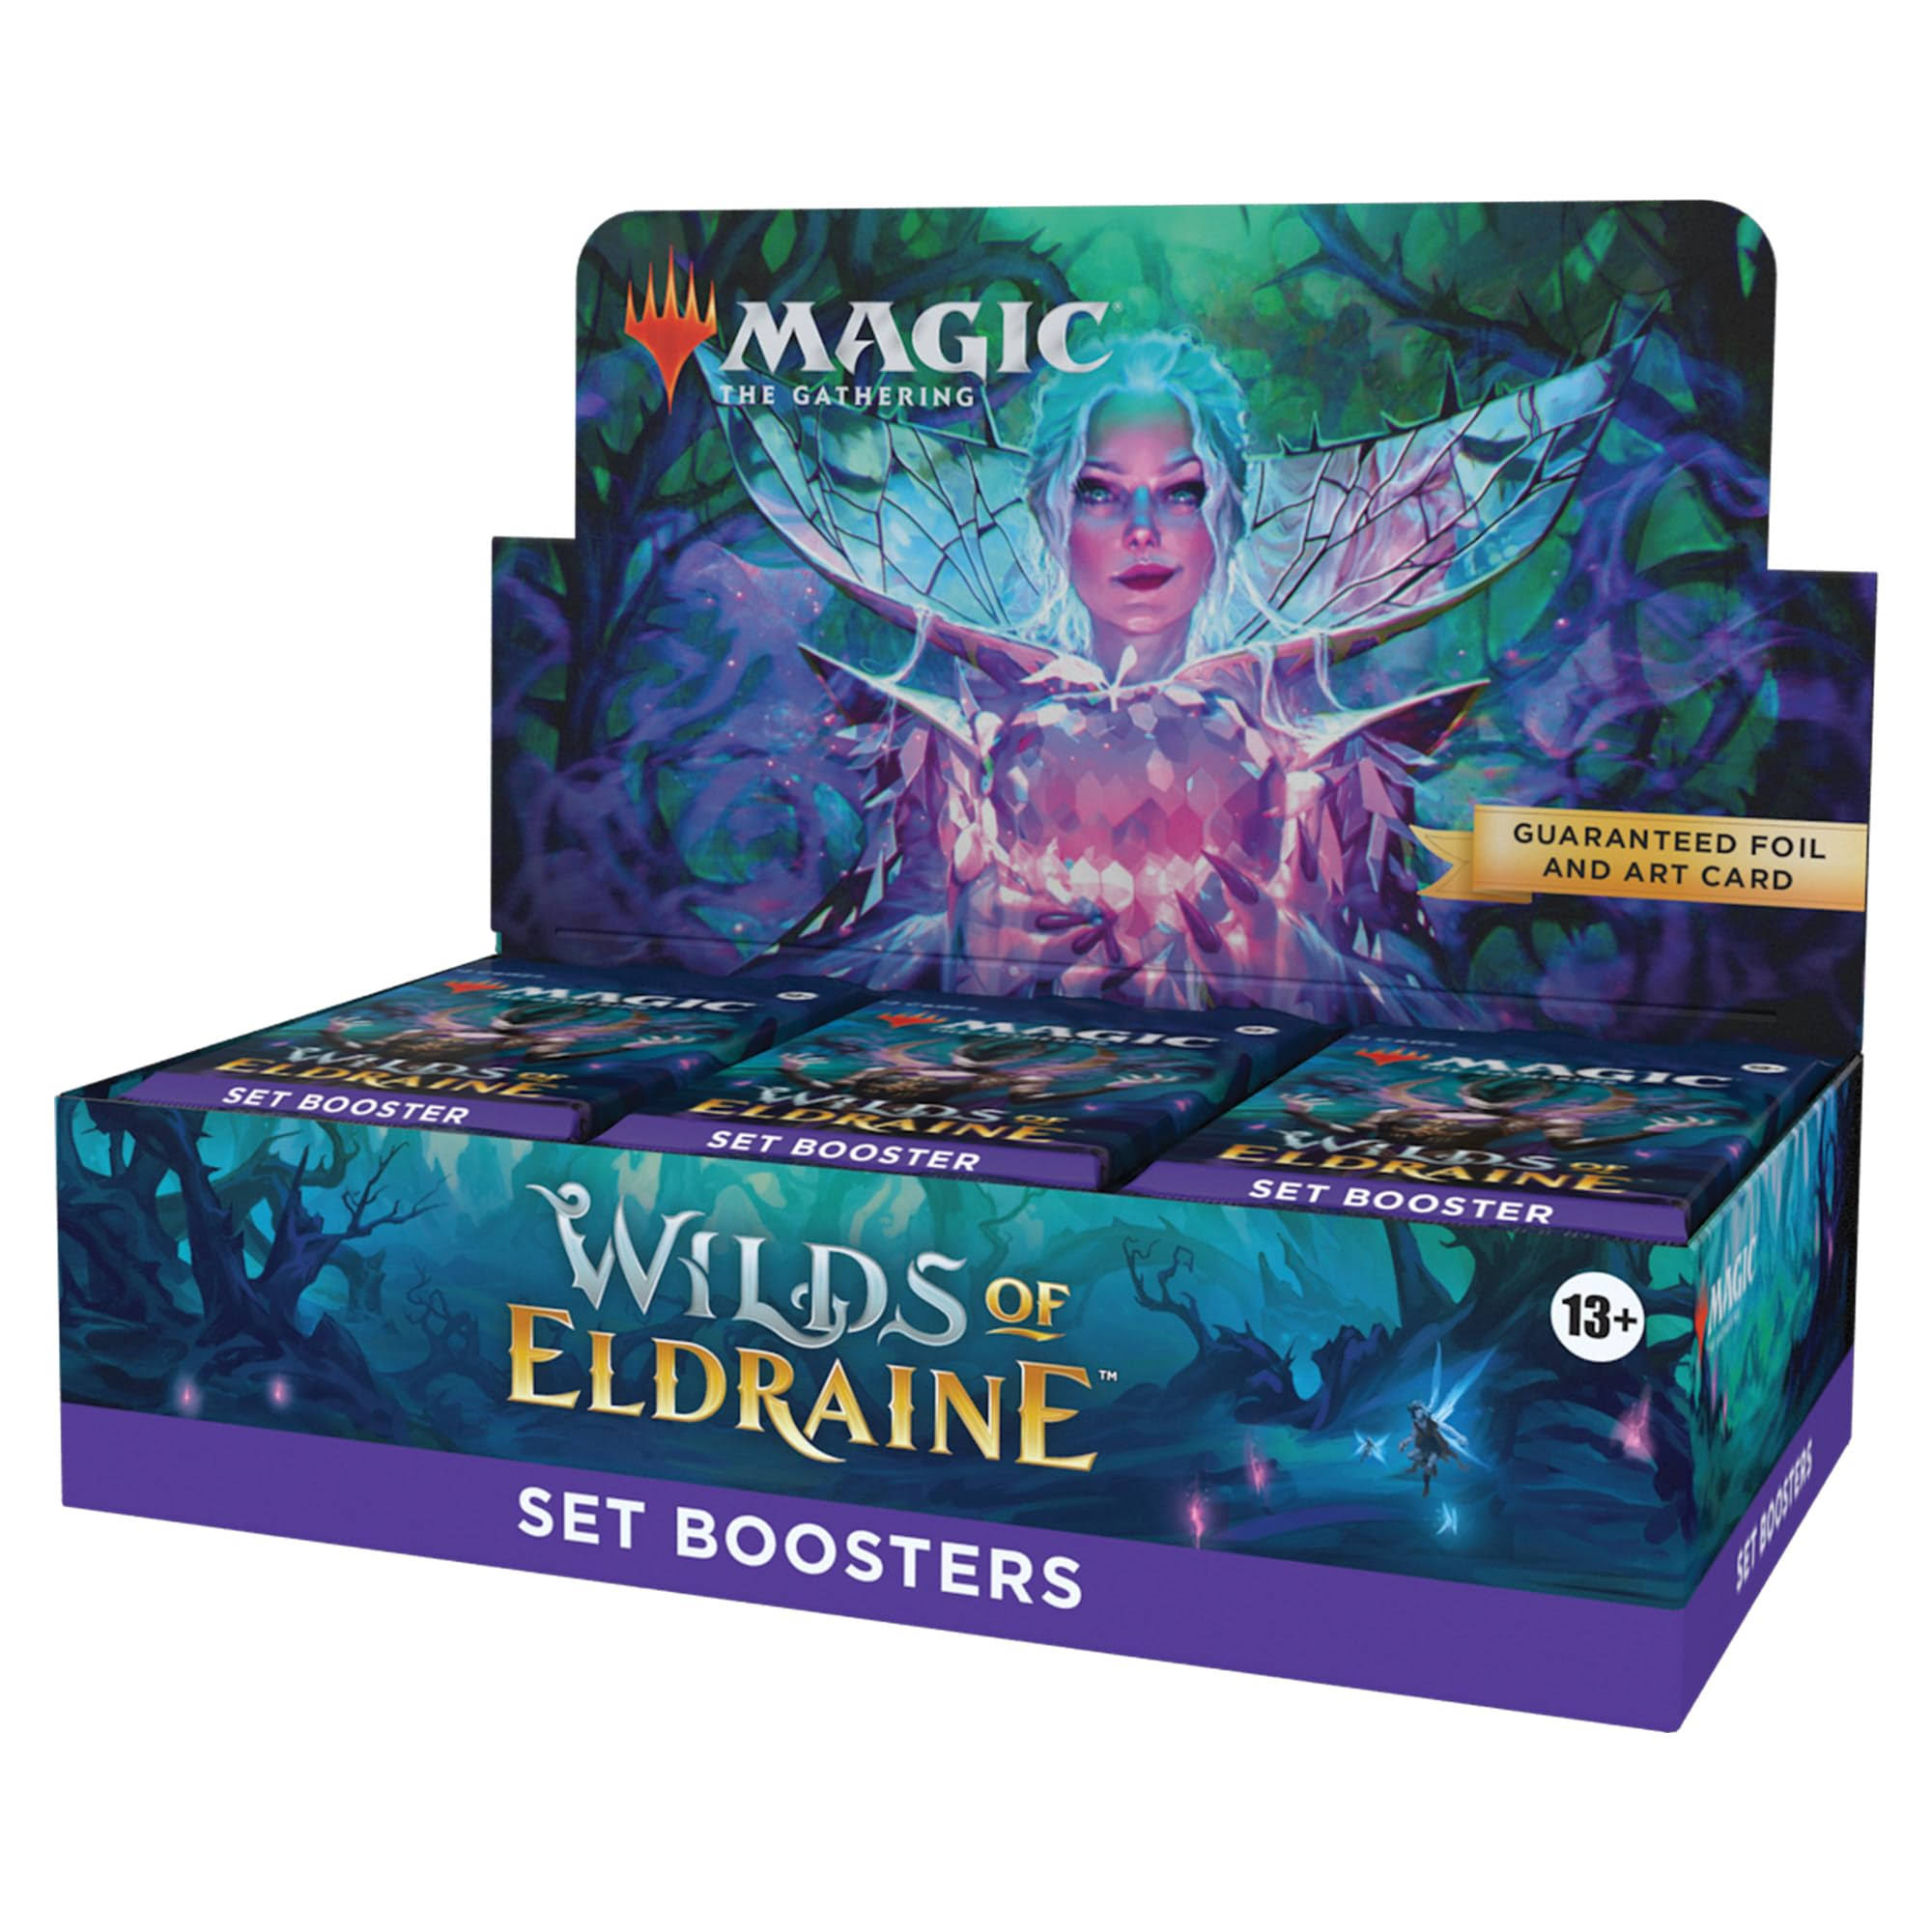 Magic The Gathering - Wilds of Eldraine - Set Booster Box